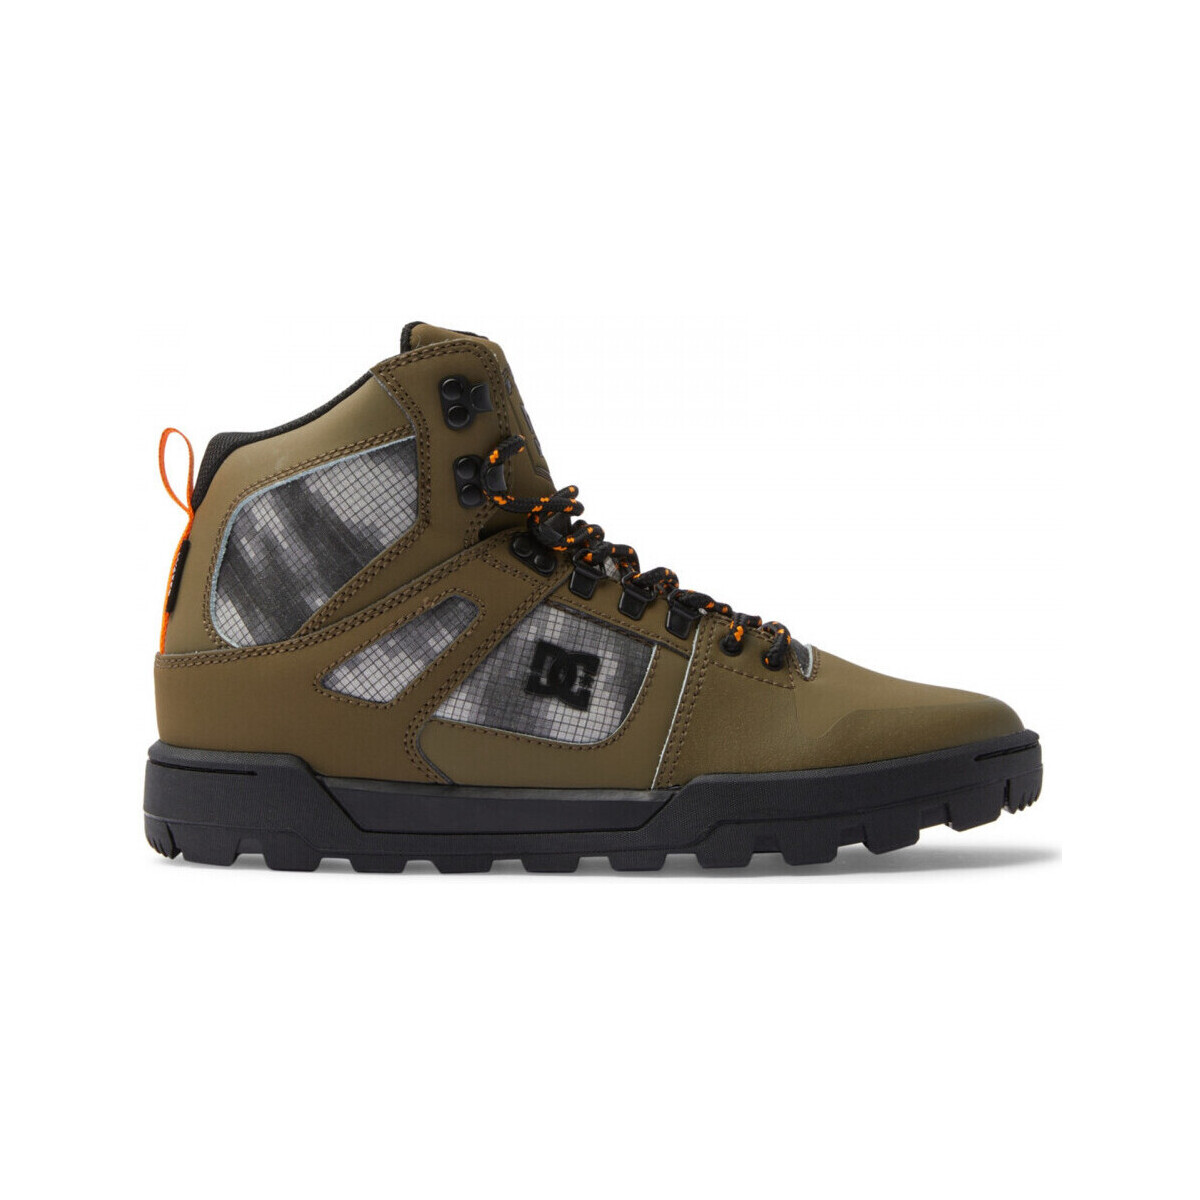 Chaussures Homme Bottes DC Shoes Pure ht wr Vert